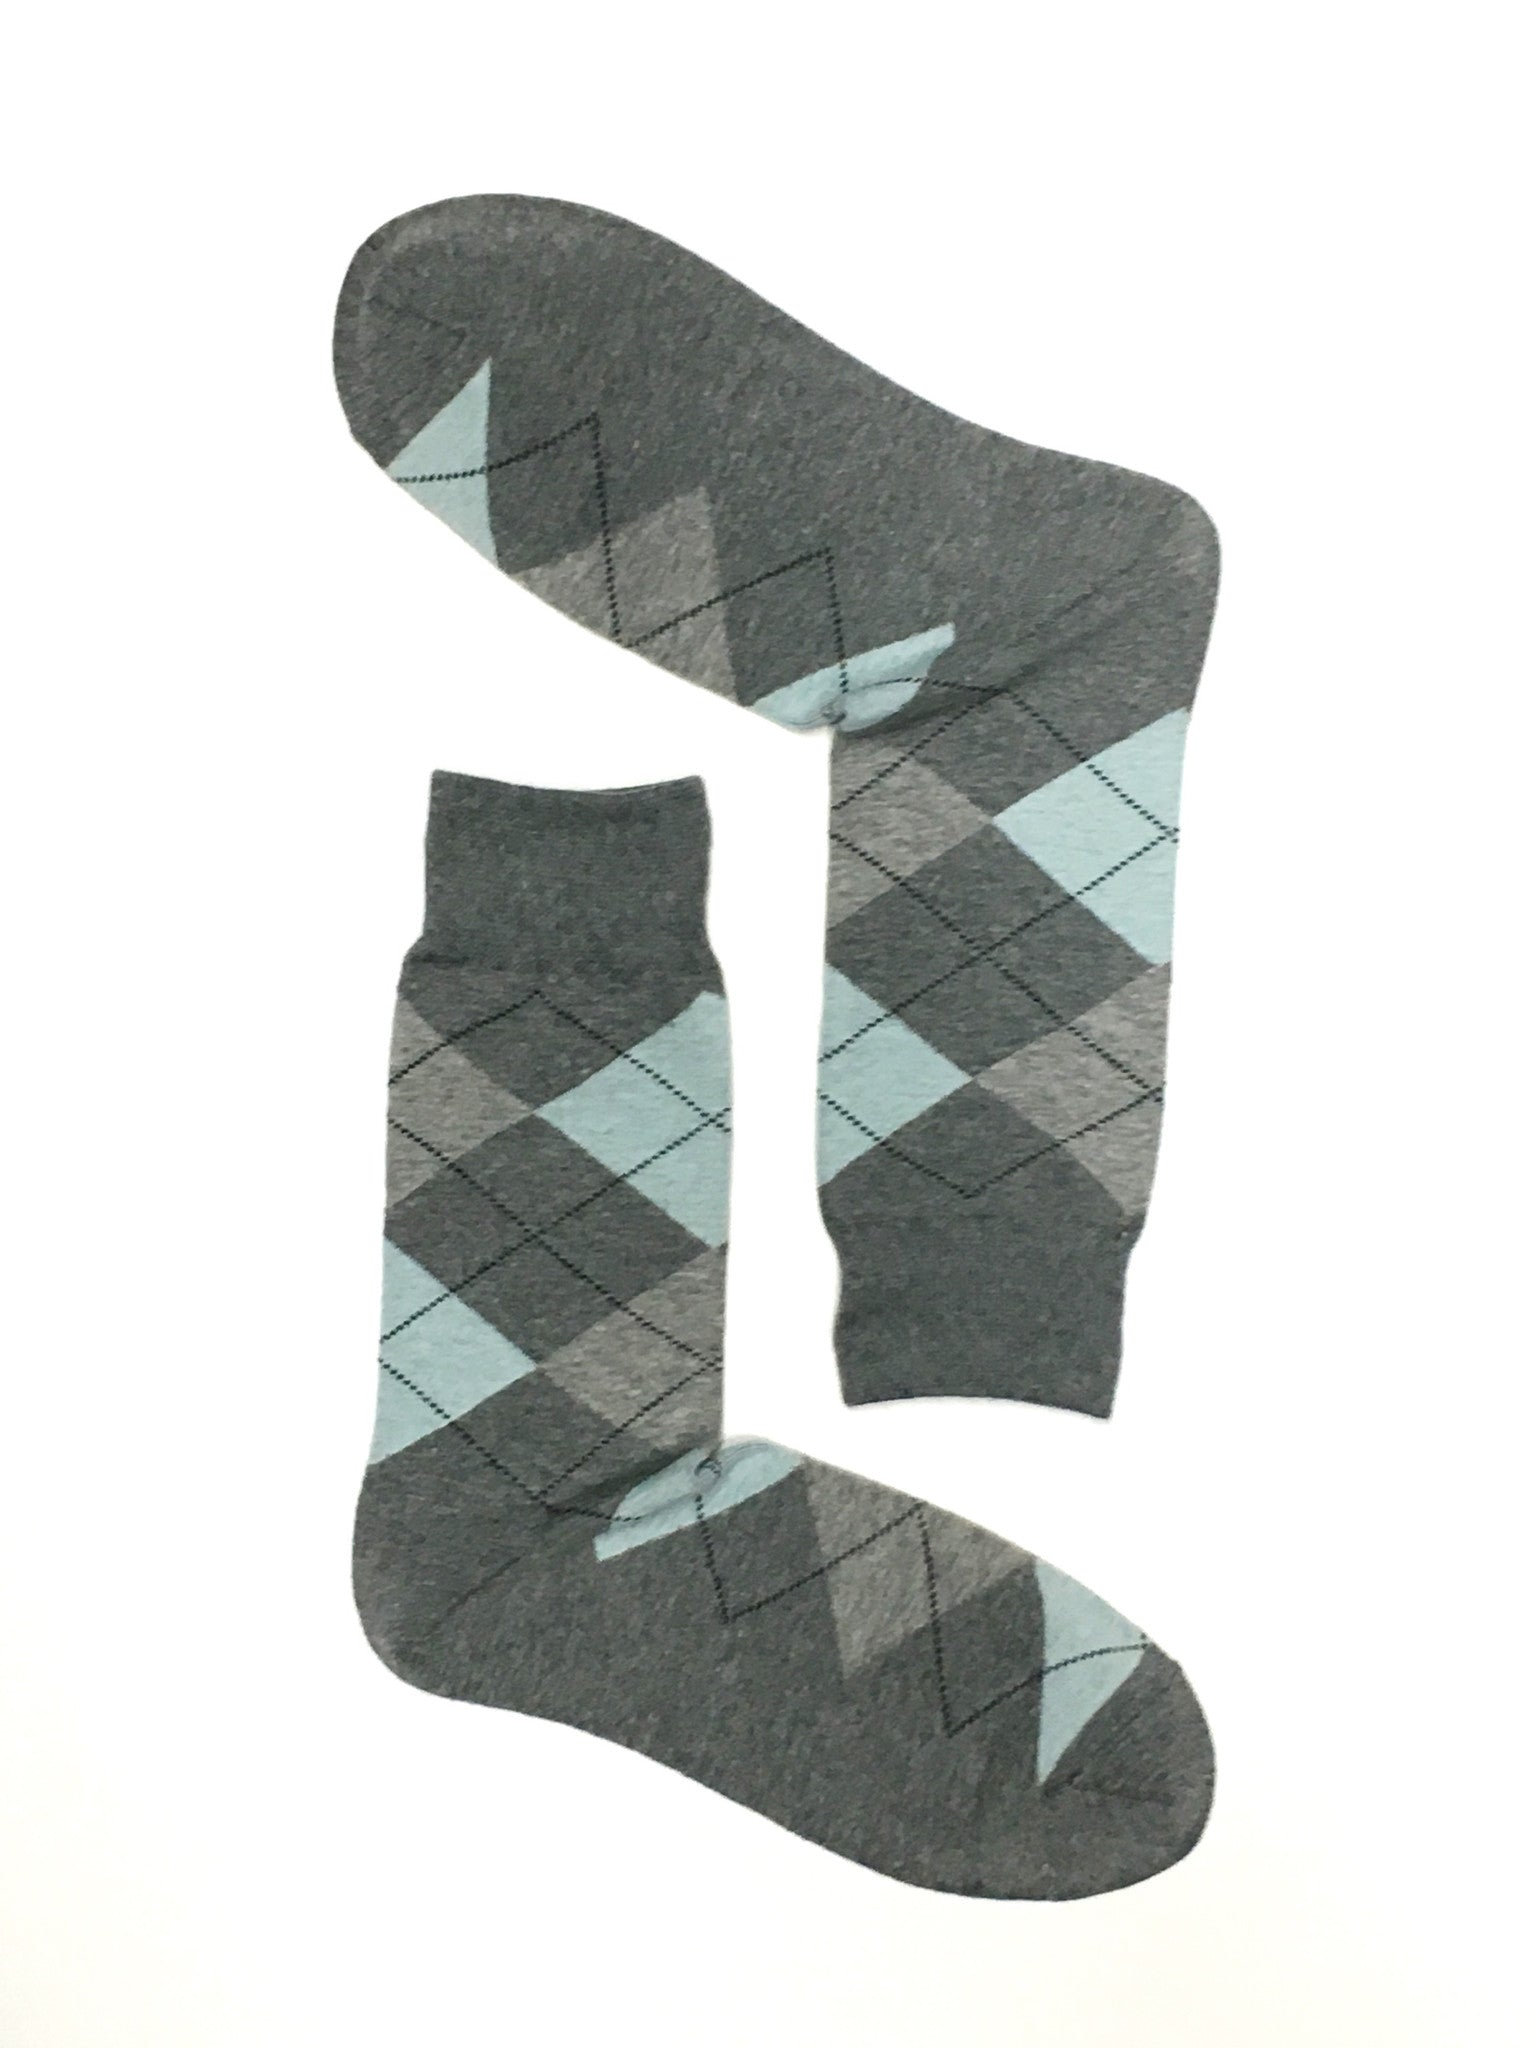 Awesome argyle dress socks that will make you look sharp